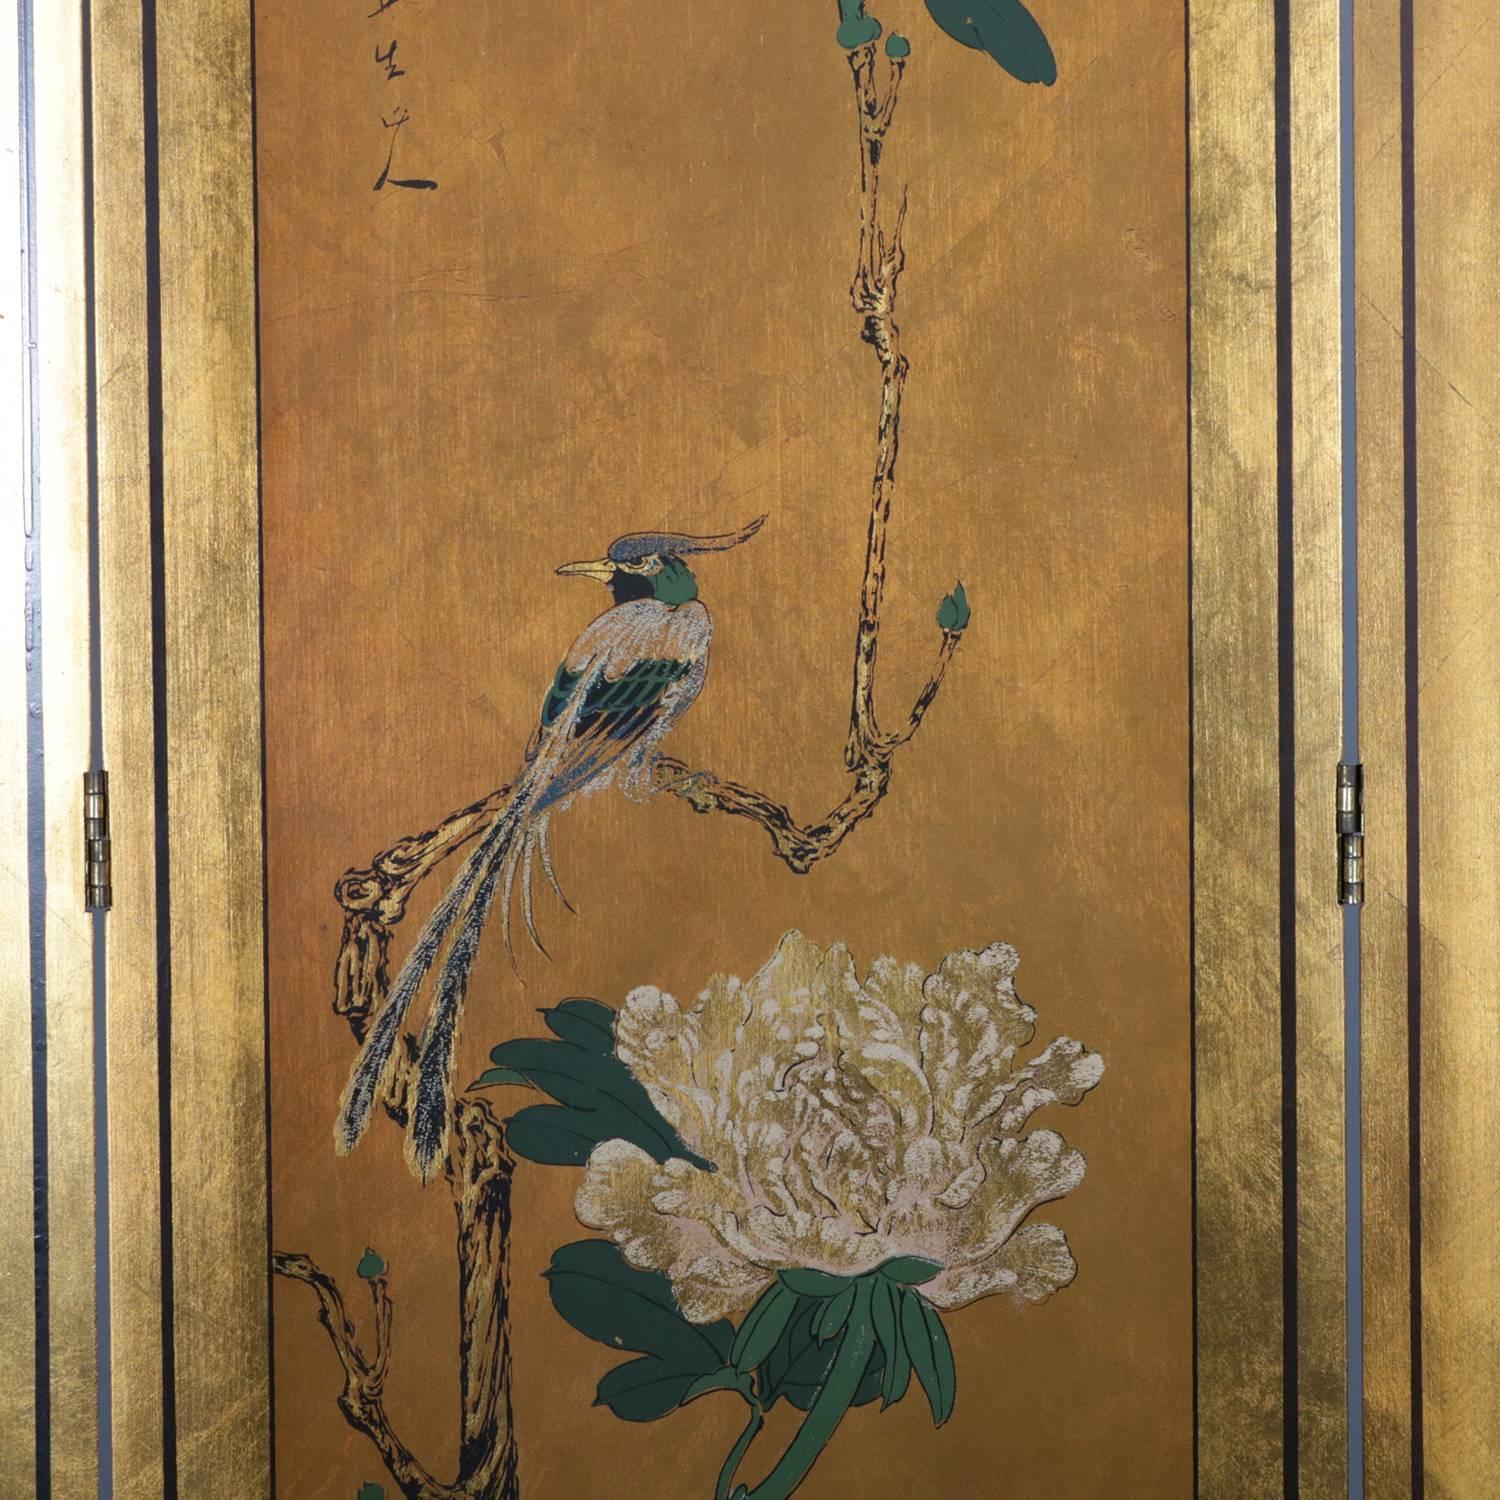 Vintage Japanese giltwood dressing privacy screen features four panels with chop mark signed hand painted garden scenes including flowering trees and birds, double action hinges for 360 degree placement, 20th century.

Measures: 85